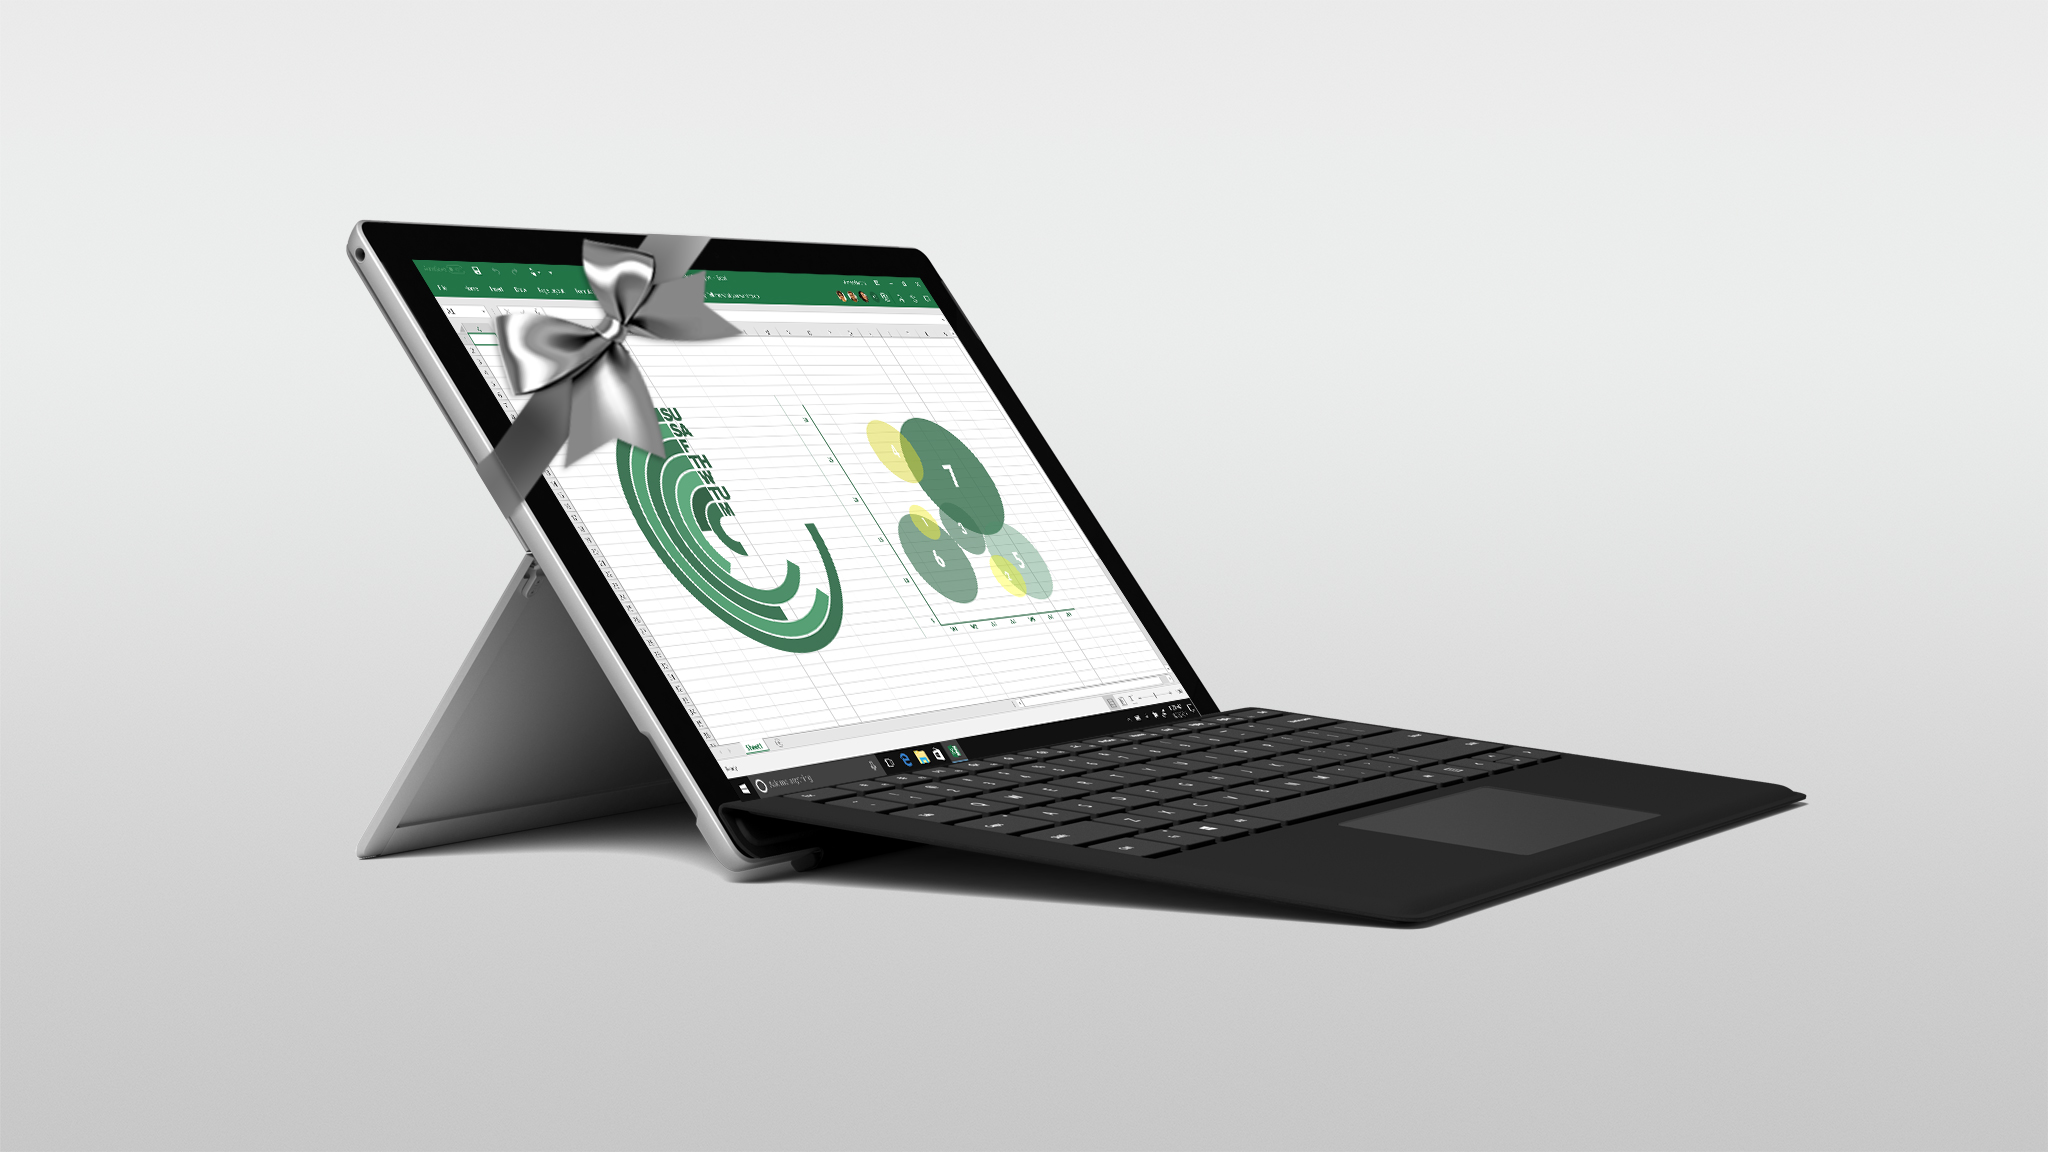 The new Surface Pro wrapped in a silver bow with Excel shown on the screen.